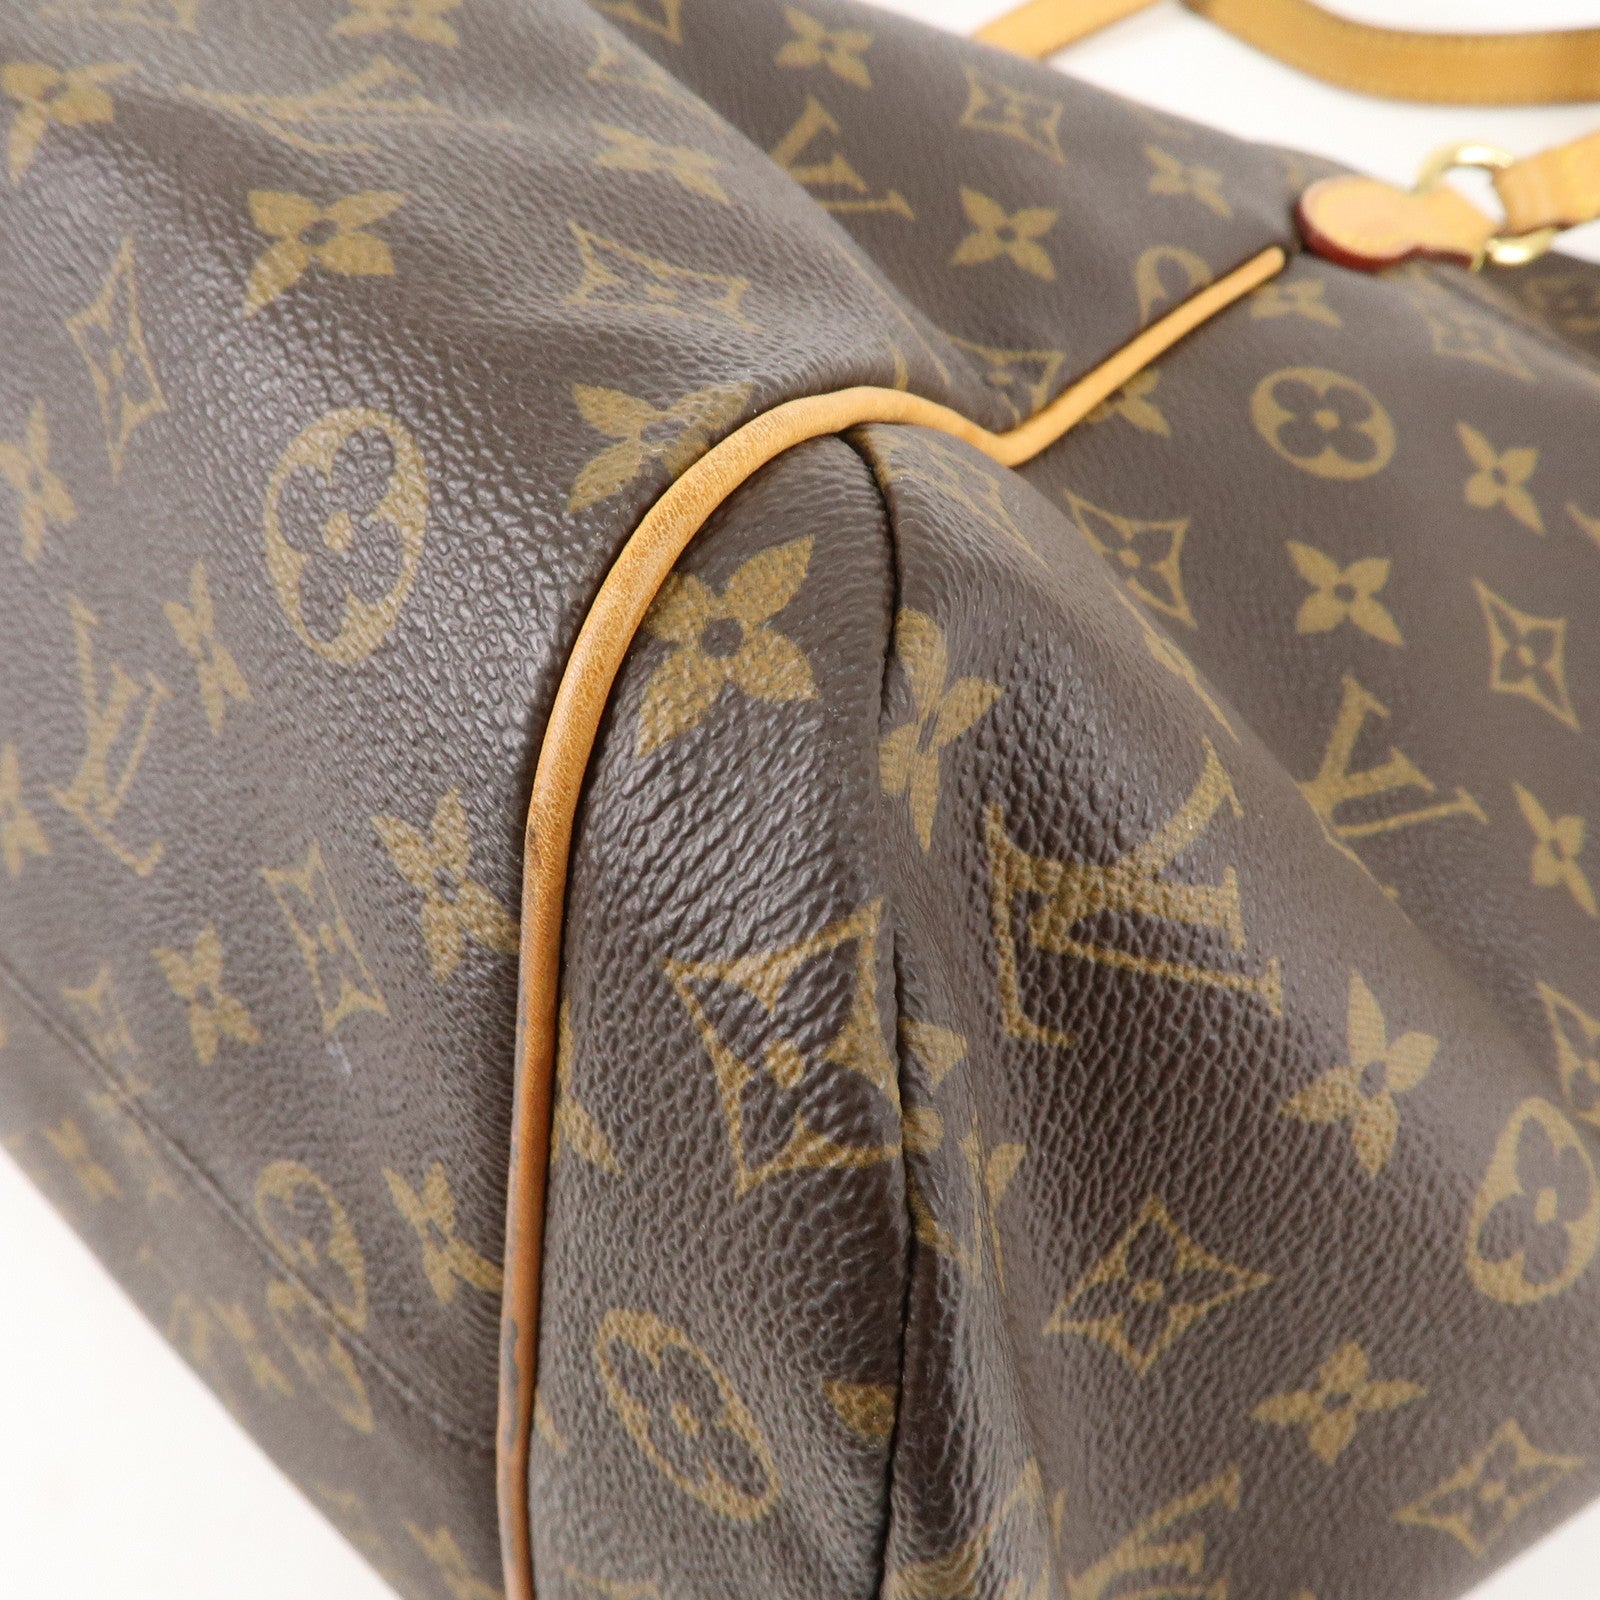 Louis Vuitton M56690 Monogram Totally GM Shopping Tote - The Attic Place